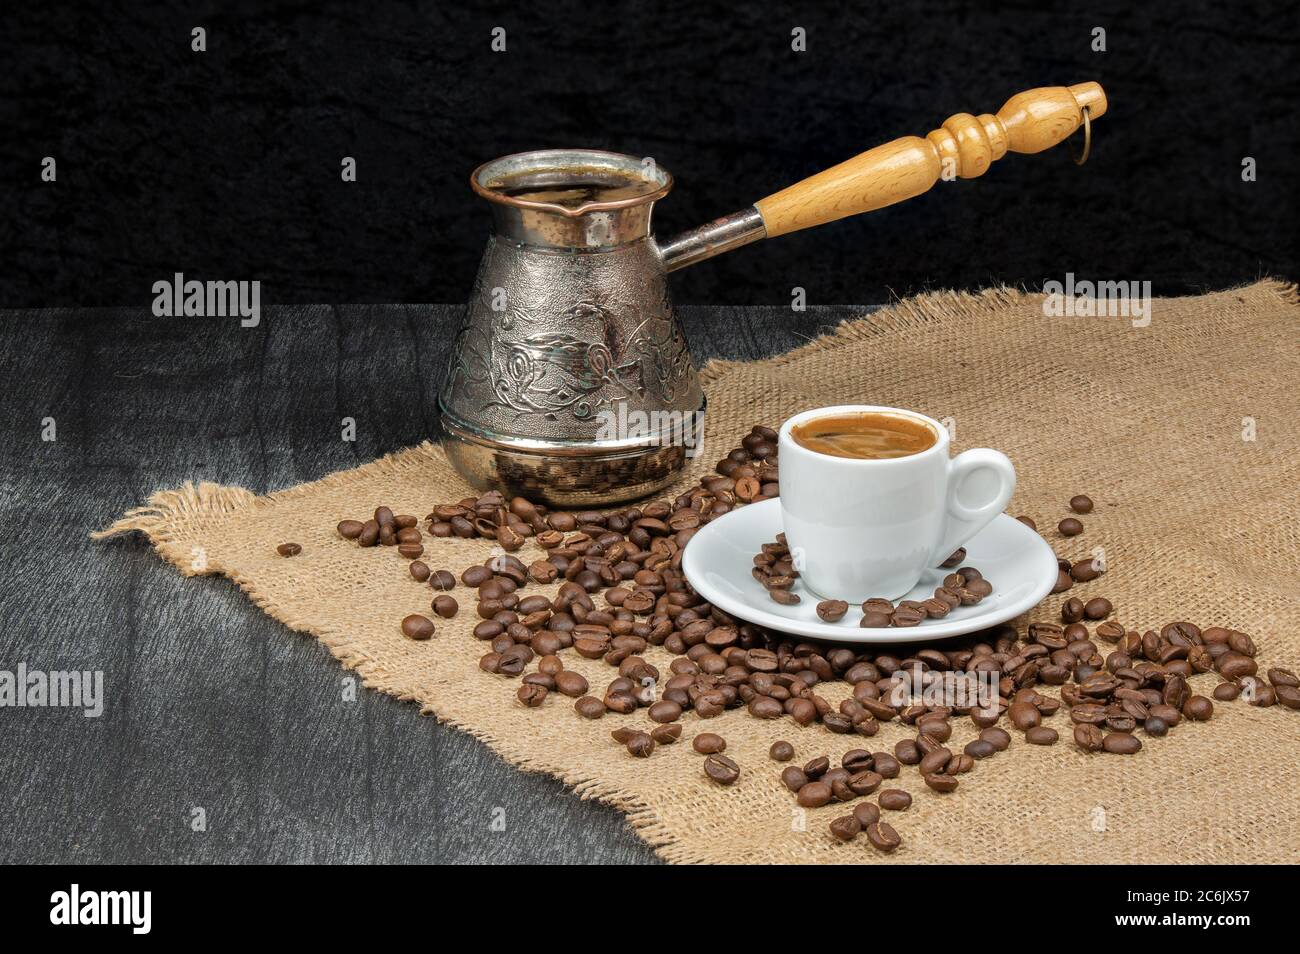 https://c8.alamy.com/comp/2C6JX57/greek-coffee-in-white-small-mug-and-vintage-coffee-pot-turkish-coffee-cup-with-beans-on-wooden-background-coffee-culture-traditional-concept-copy-2C6JX57.jpg